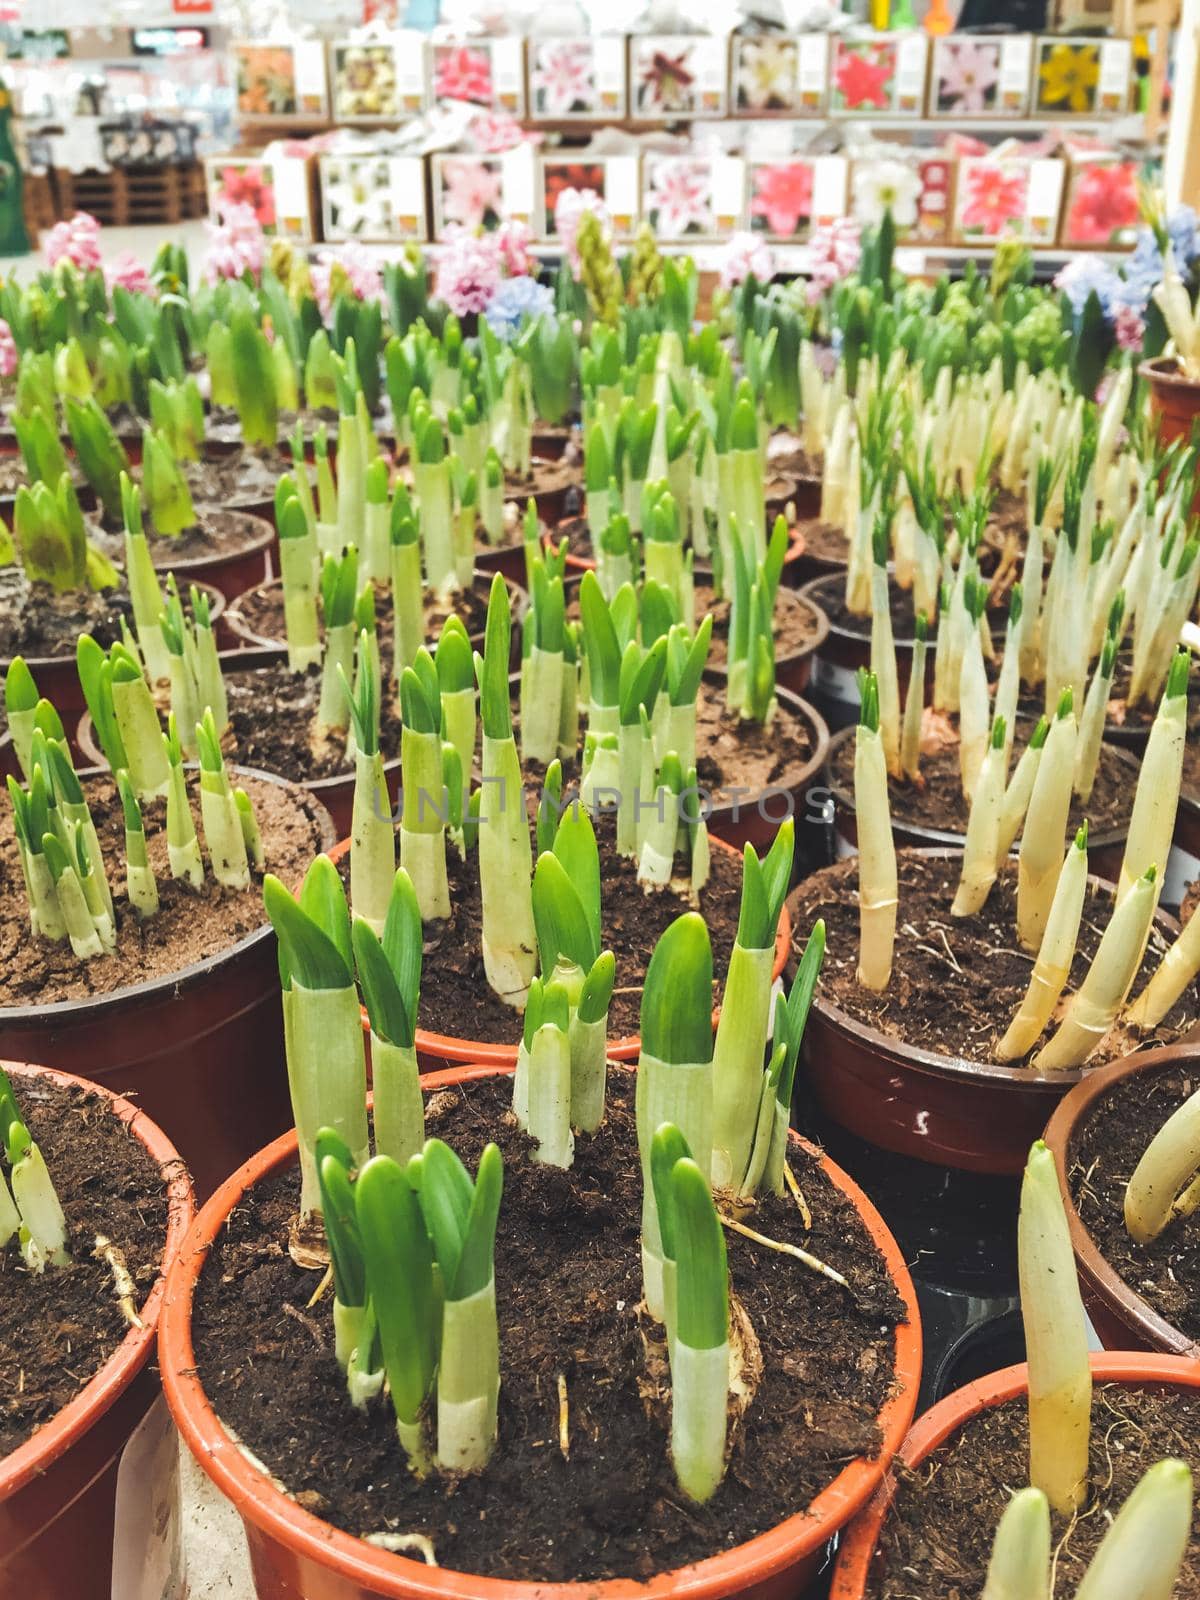 Seedlings of colorful hyacinths in pots. Spring sales in malls and flower shops. Blossoming plants for botanical lovers.